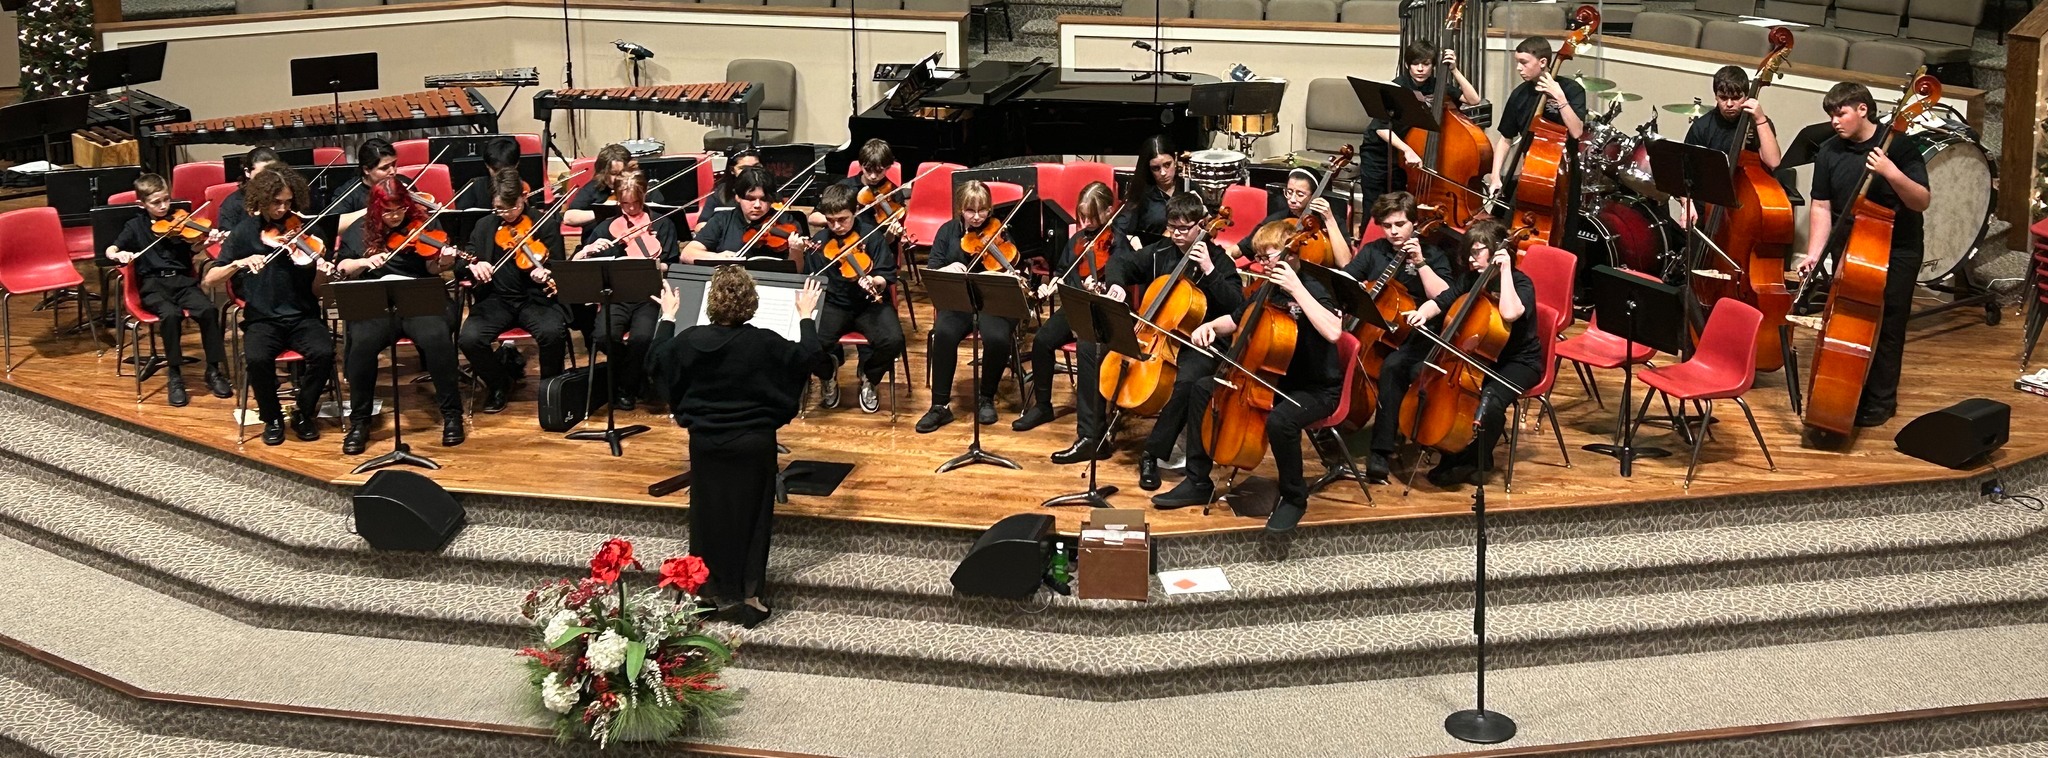 Sounds of the Season - Orchestra conducted by Ms. Nicole Lambert